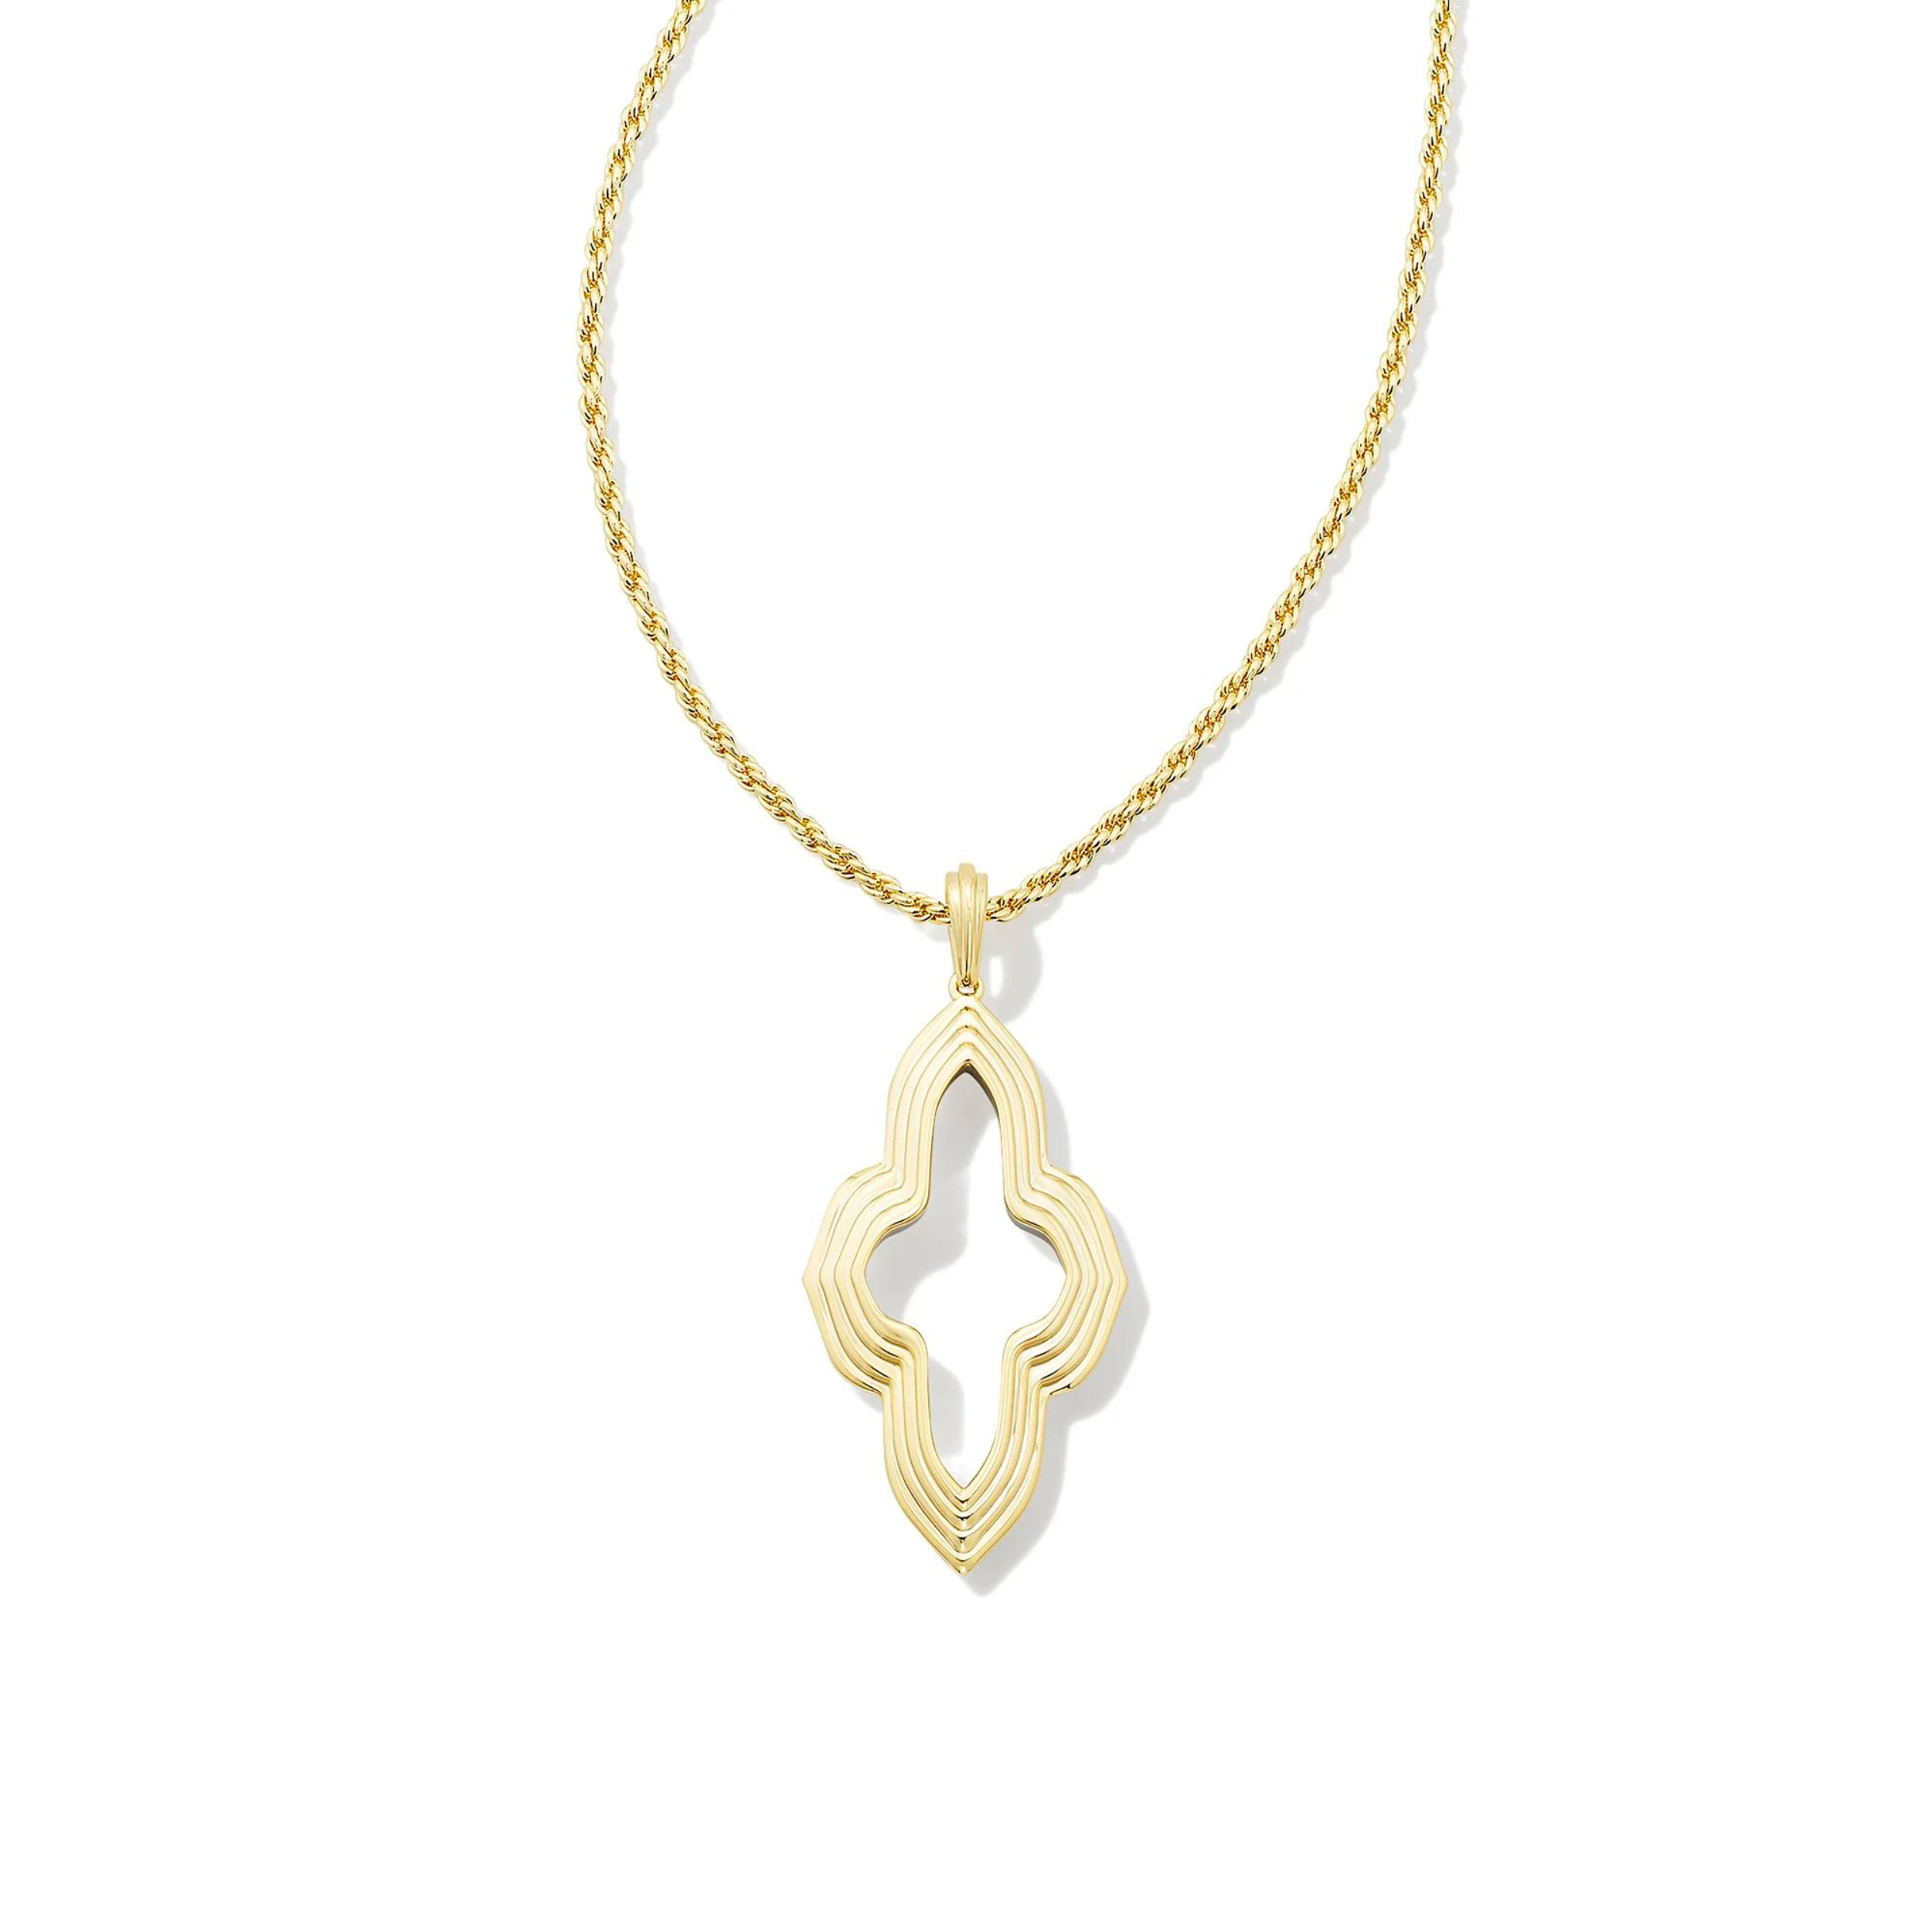 Kendra Scott | Abbie Small Long Pendant Necklace in Mixed Metal - Giddy Up Glamour Boutique